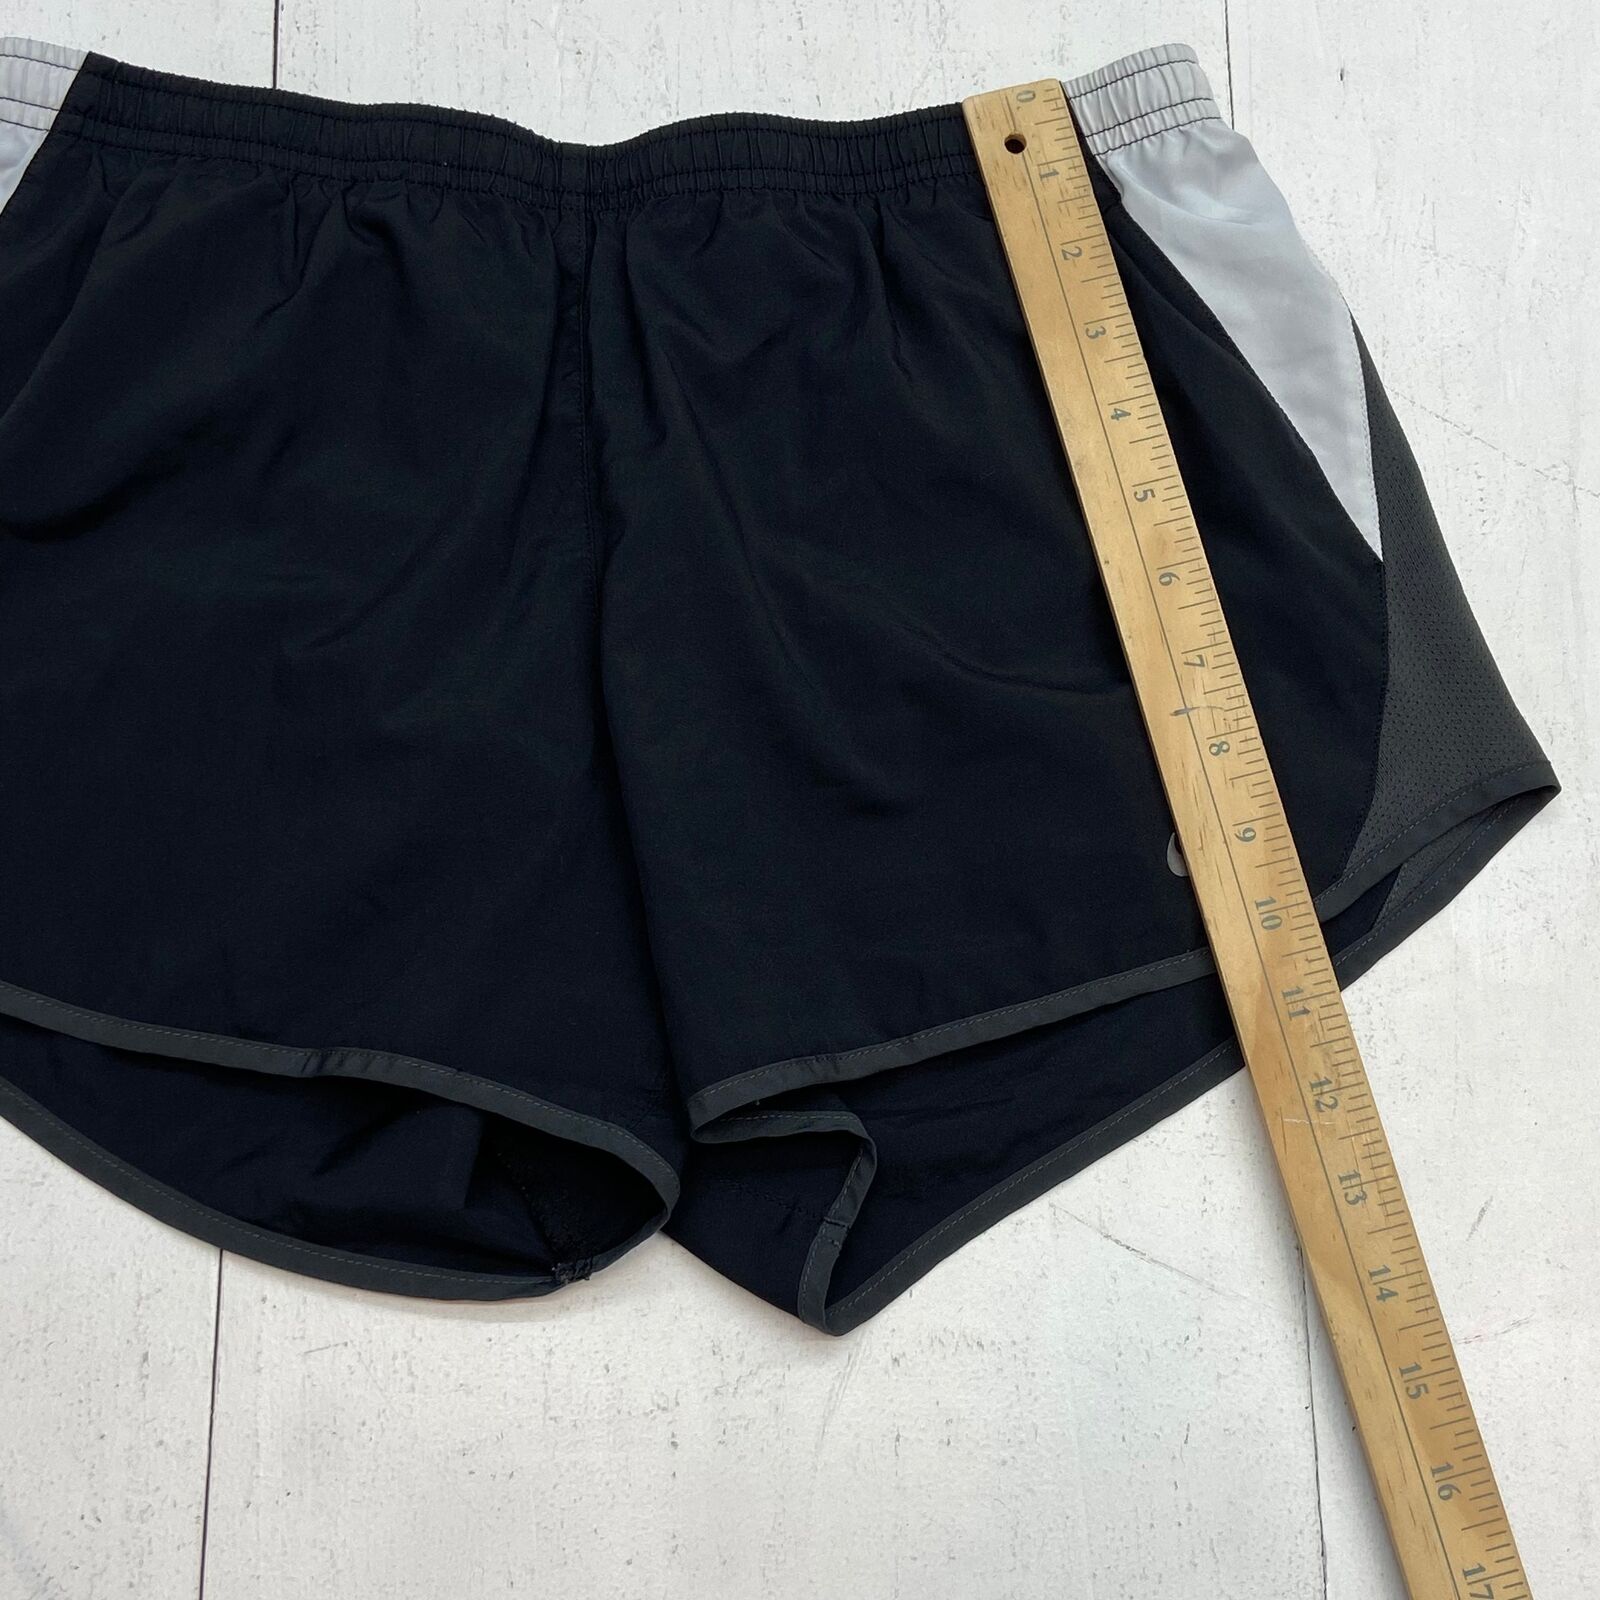 Nike Dri Fit Black Running Shorts with Liner Women Size M - beyond